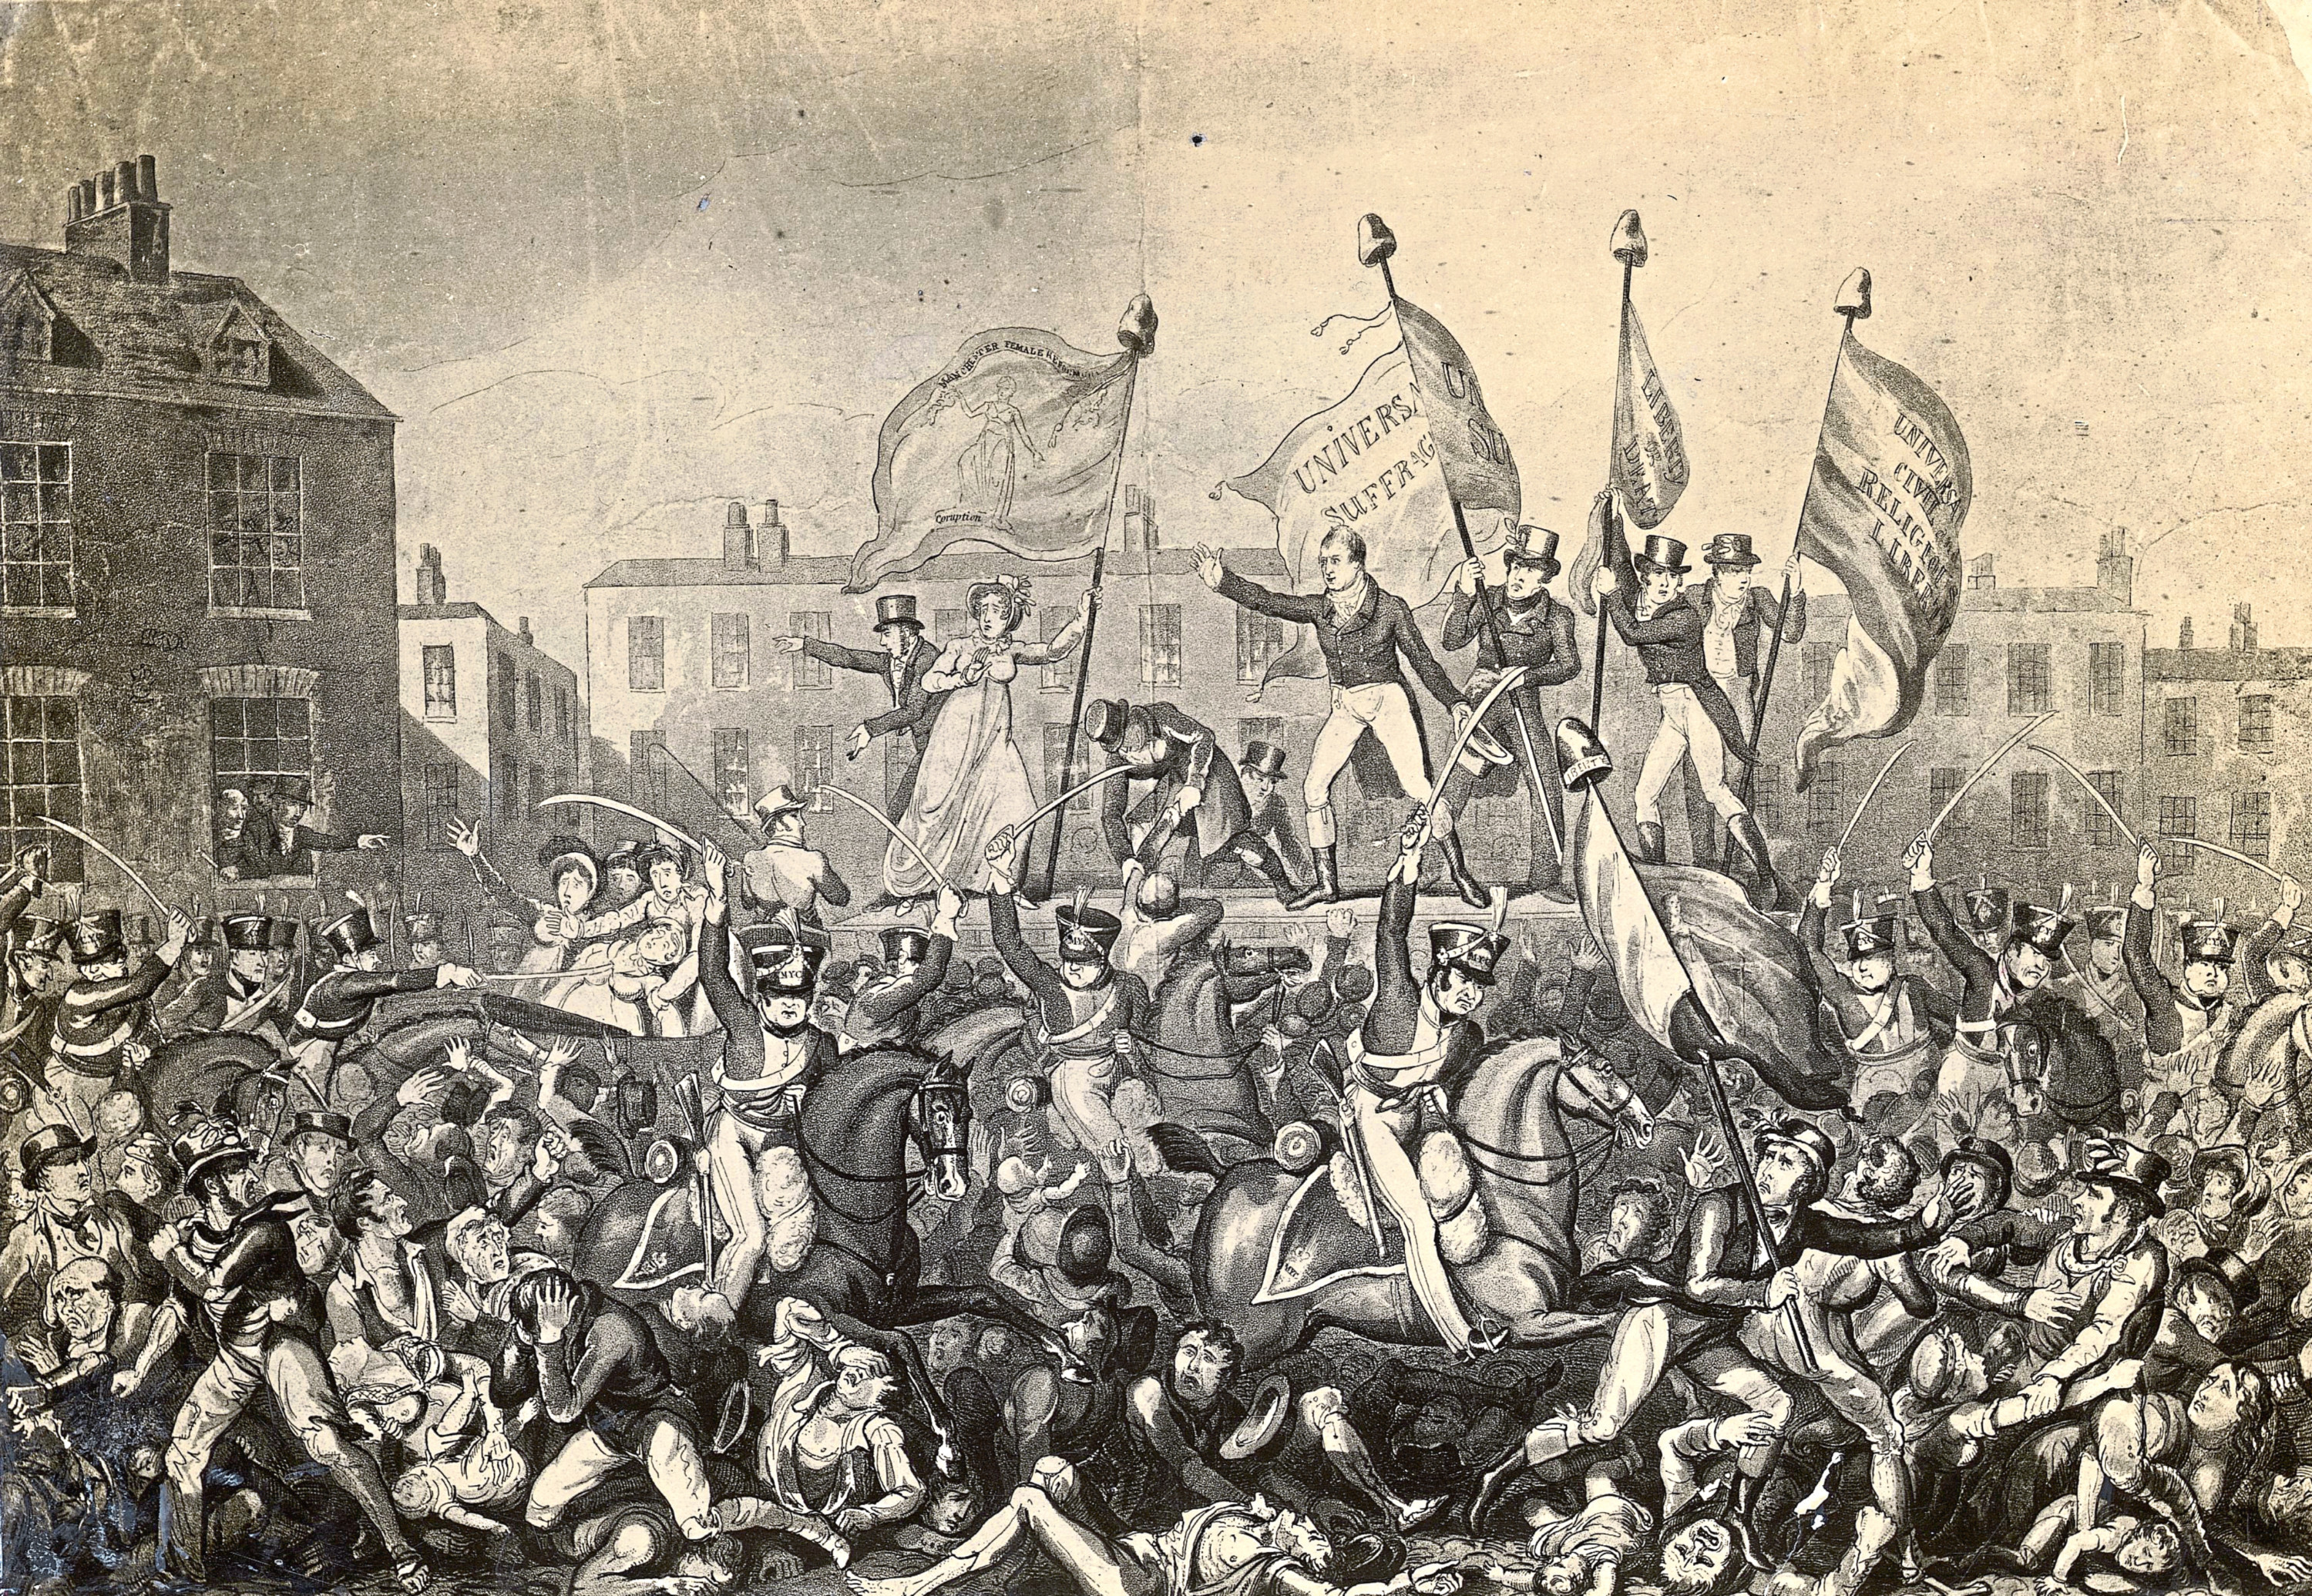 This contemporary cartoon shows cavalry charging crowds during the Peterloo Massacre in Manchester   (Rischgitz/Getty Images)